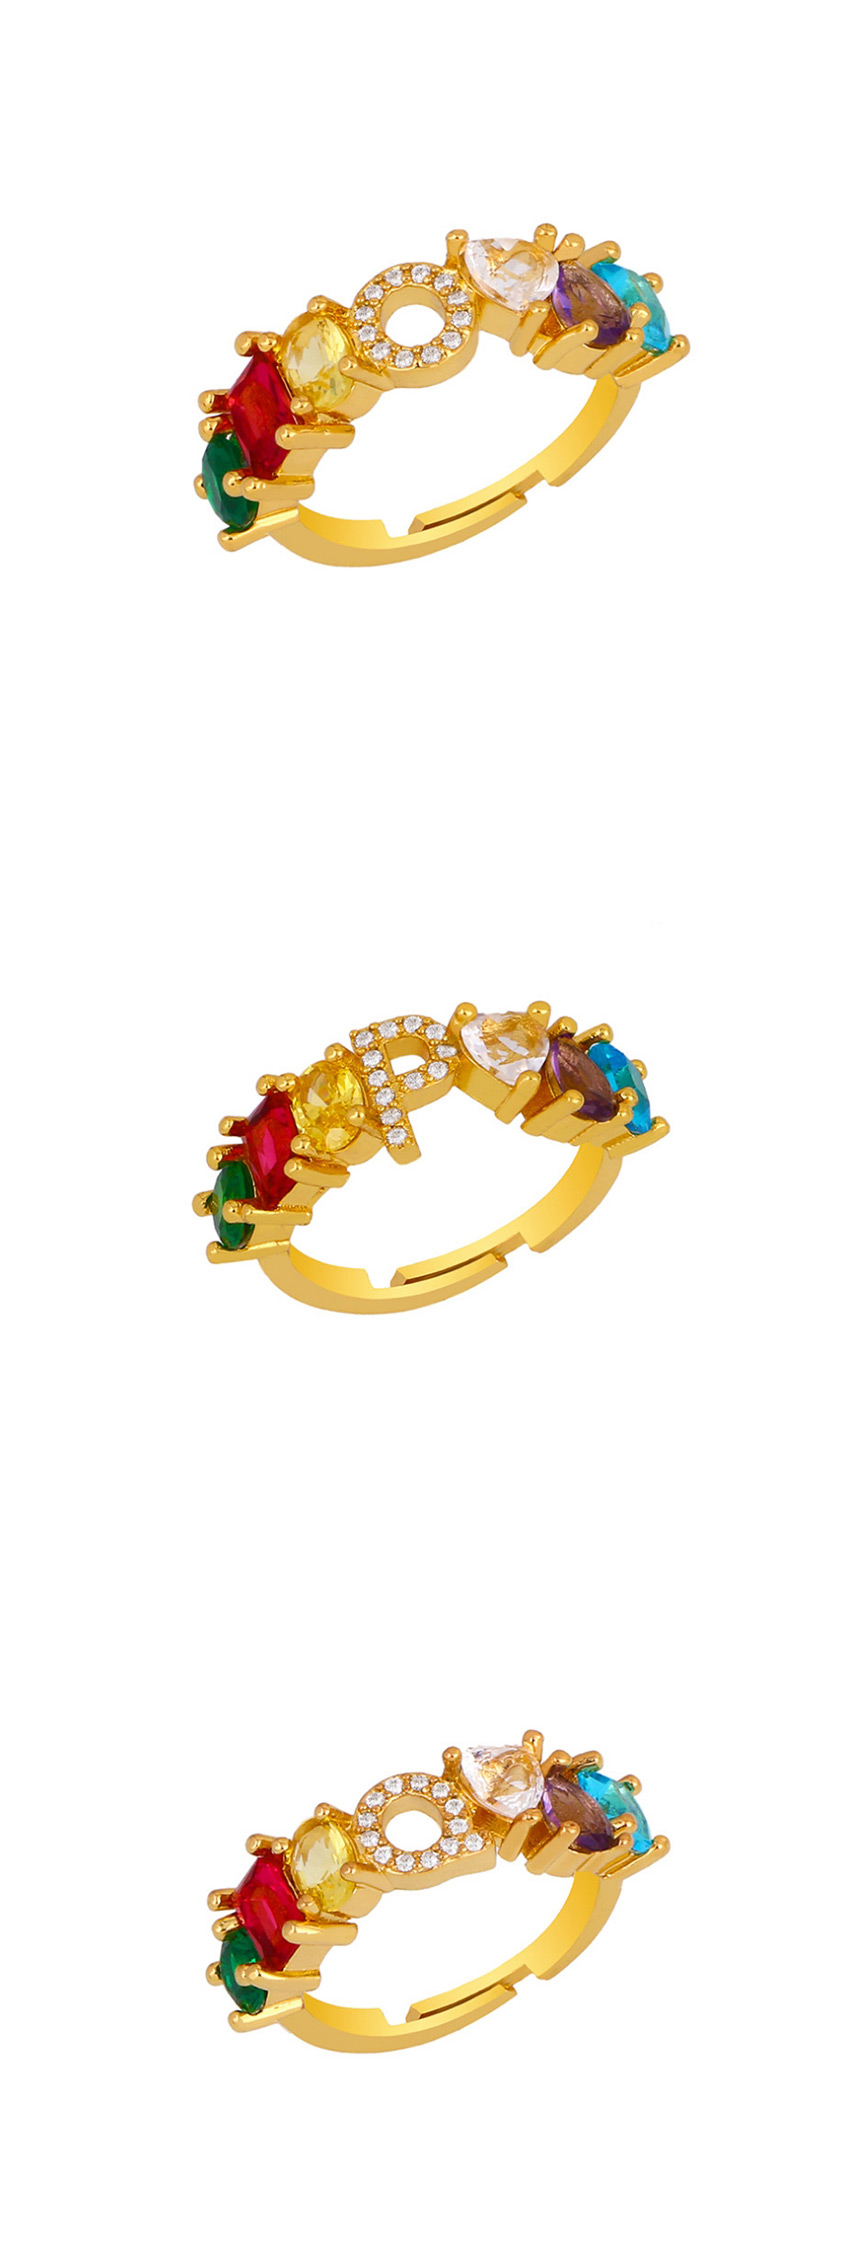 Fashion L Gold Heart-shaped Adjustable Ring With Colorful Diamond Letters,Rings